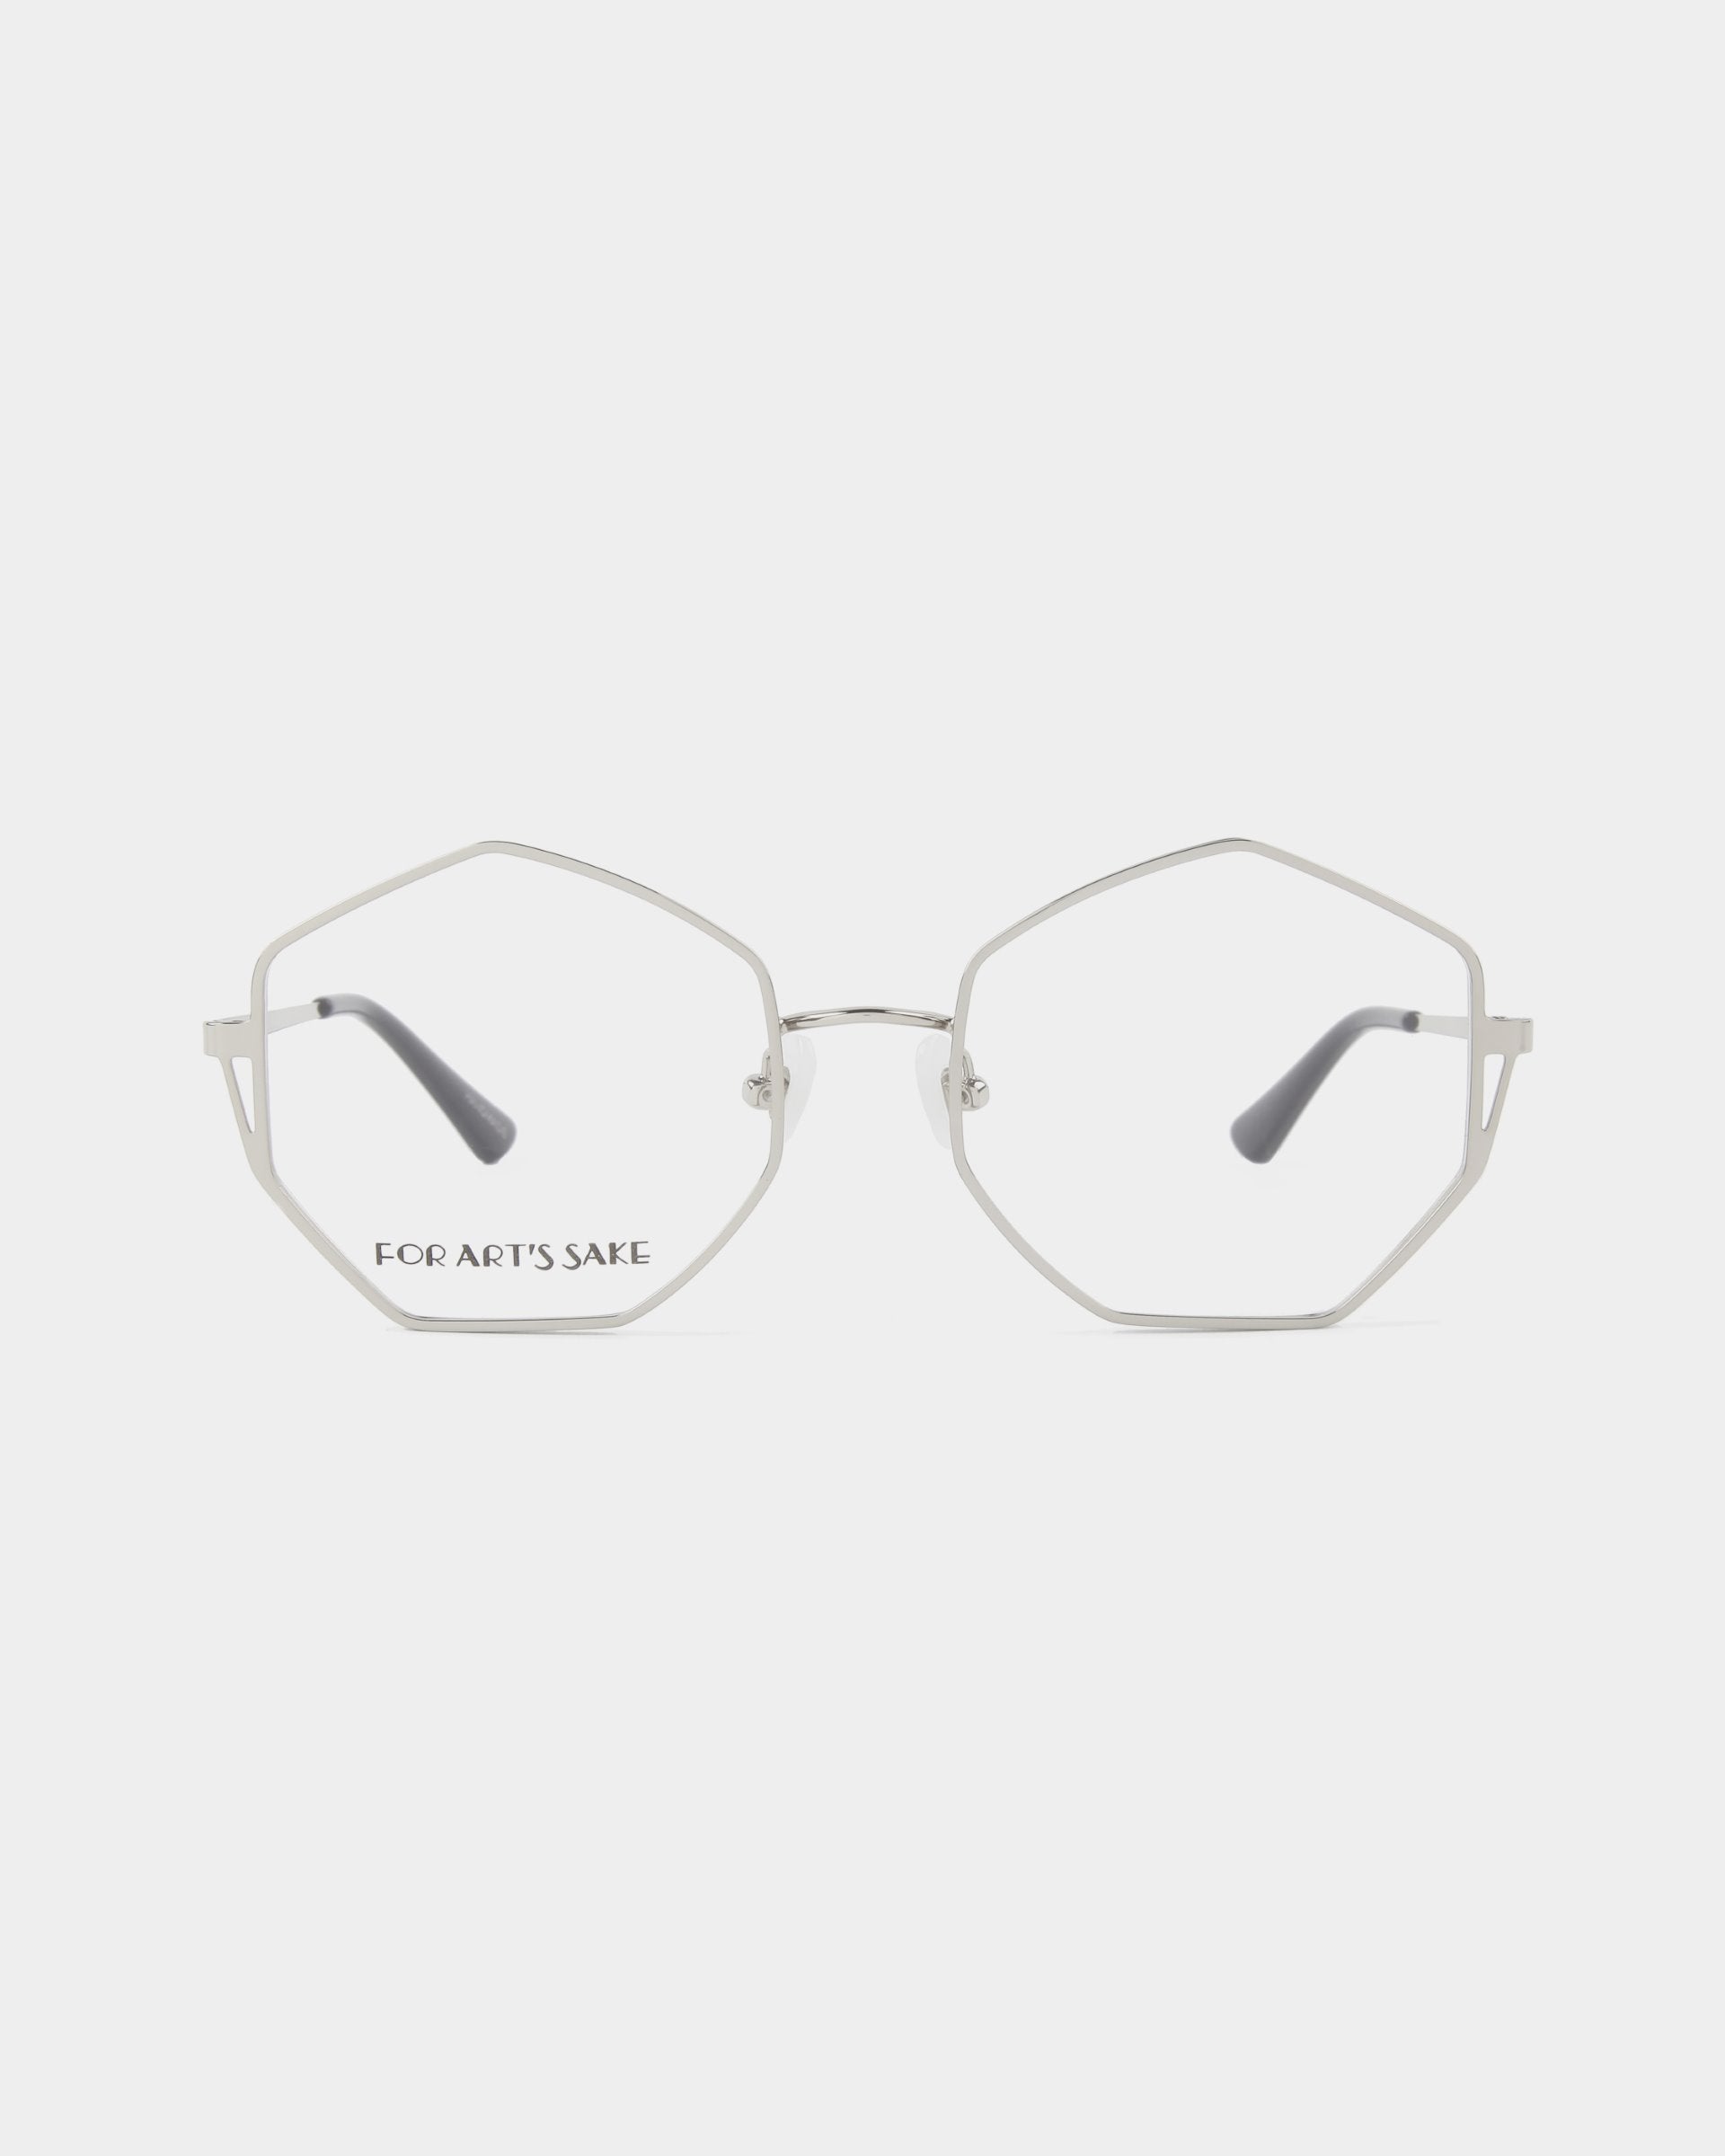 A pair of Antidote eyeglasses from For Art's Sake® with thin, 18-karat gold-plated octagonal frames and clear lenses. The bridge and temples are minimalistic, providing a modern and stylish look. The left lens displays the text "FOR ART'S SAKE" in black. The background is plain white.